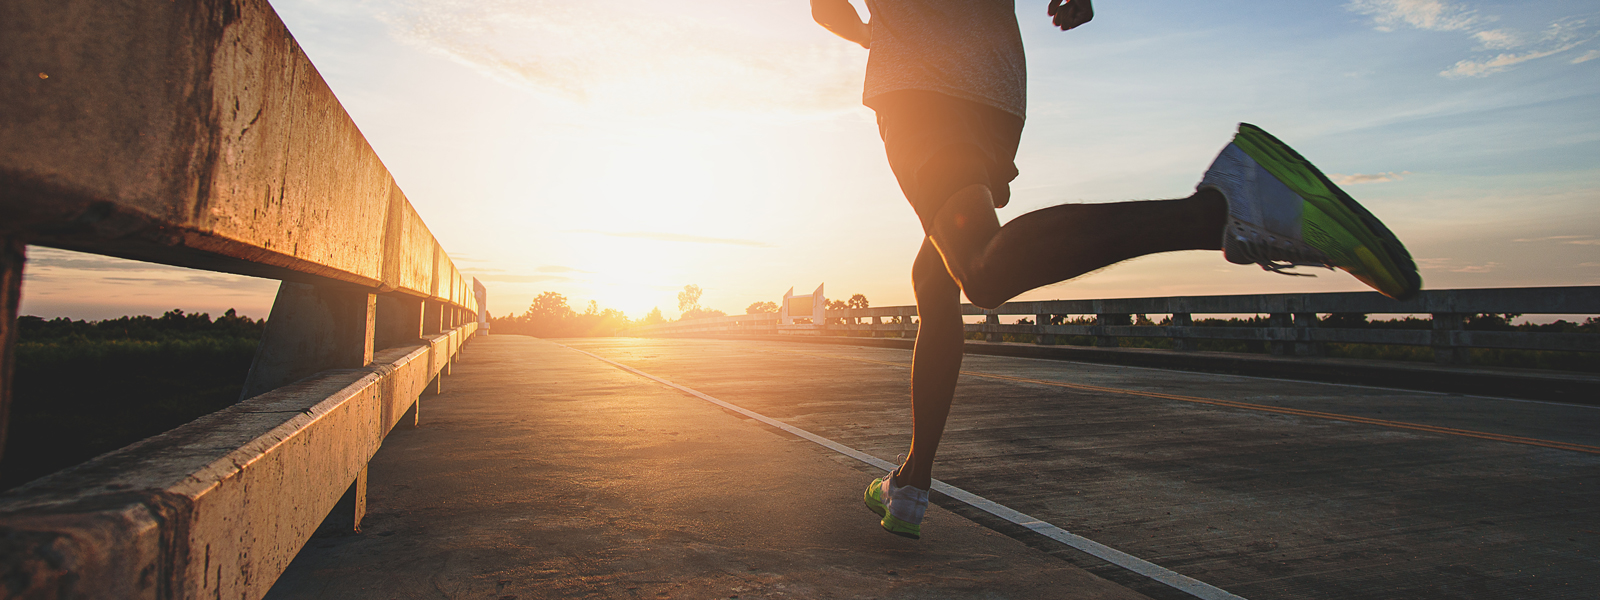 A photo of a runner sprinting into the sunrise